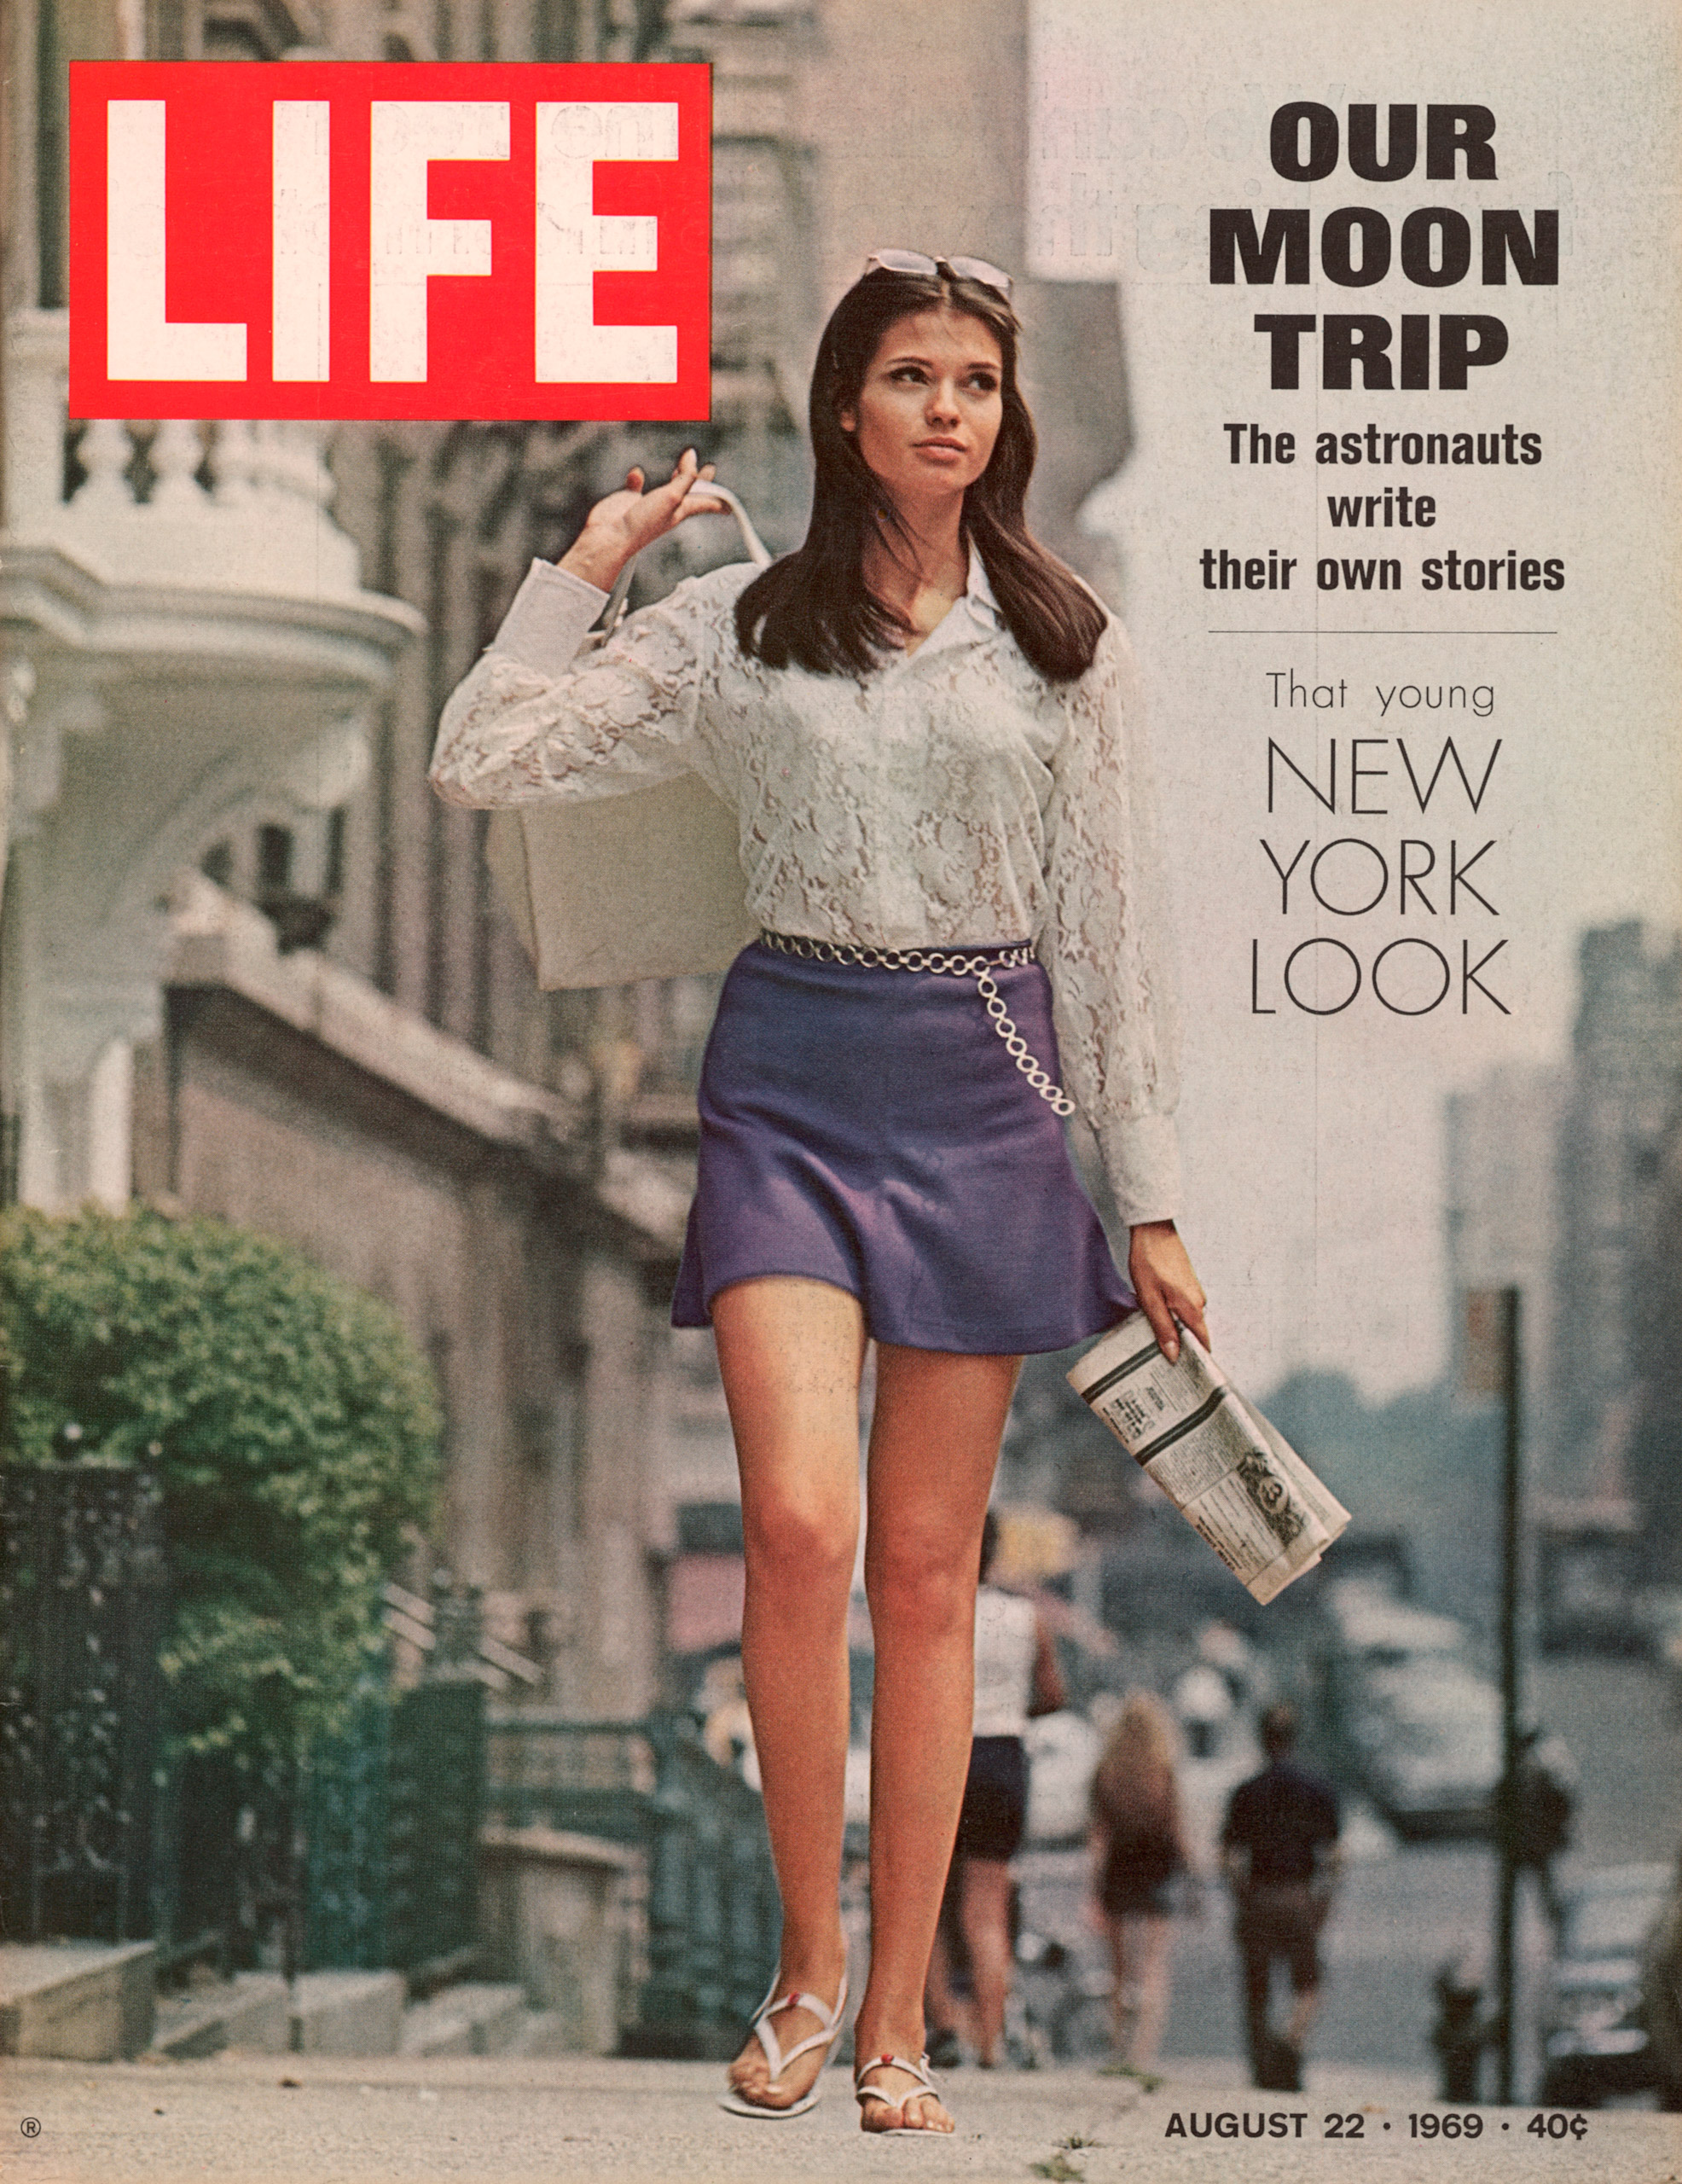 August 22, 1969 cover of LIFE magazine.